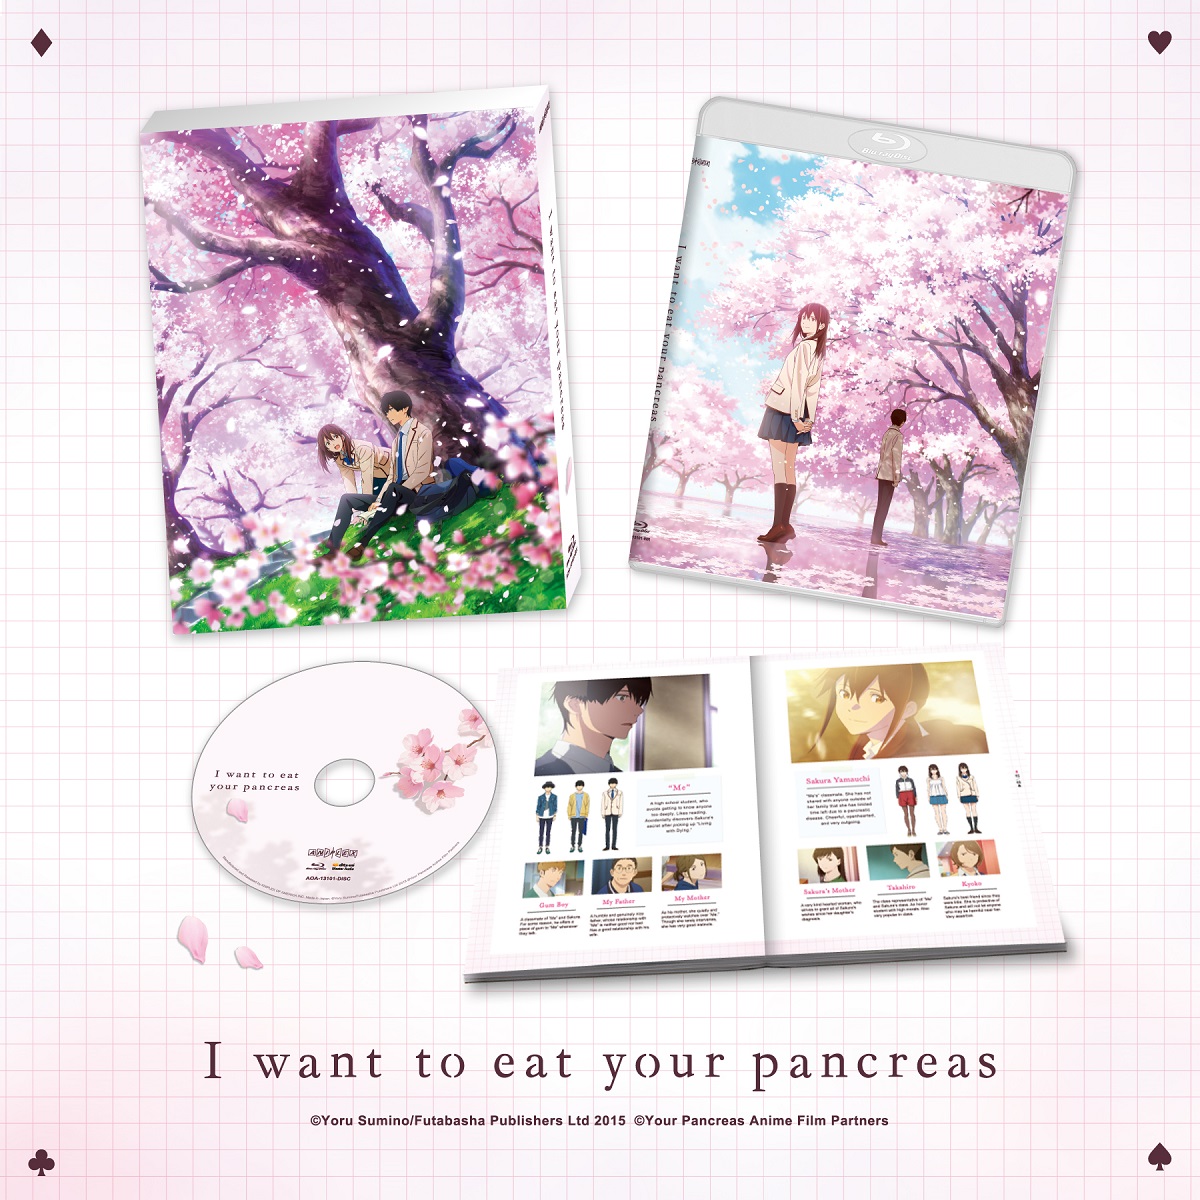 I Want to Eat Your Pancreas Blu-ray image count 1